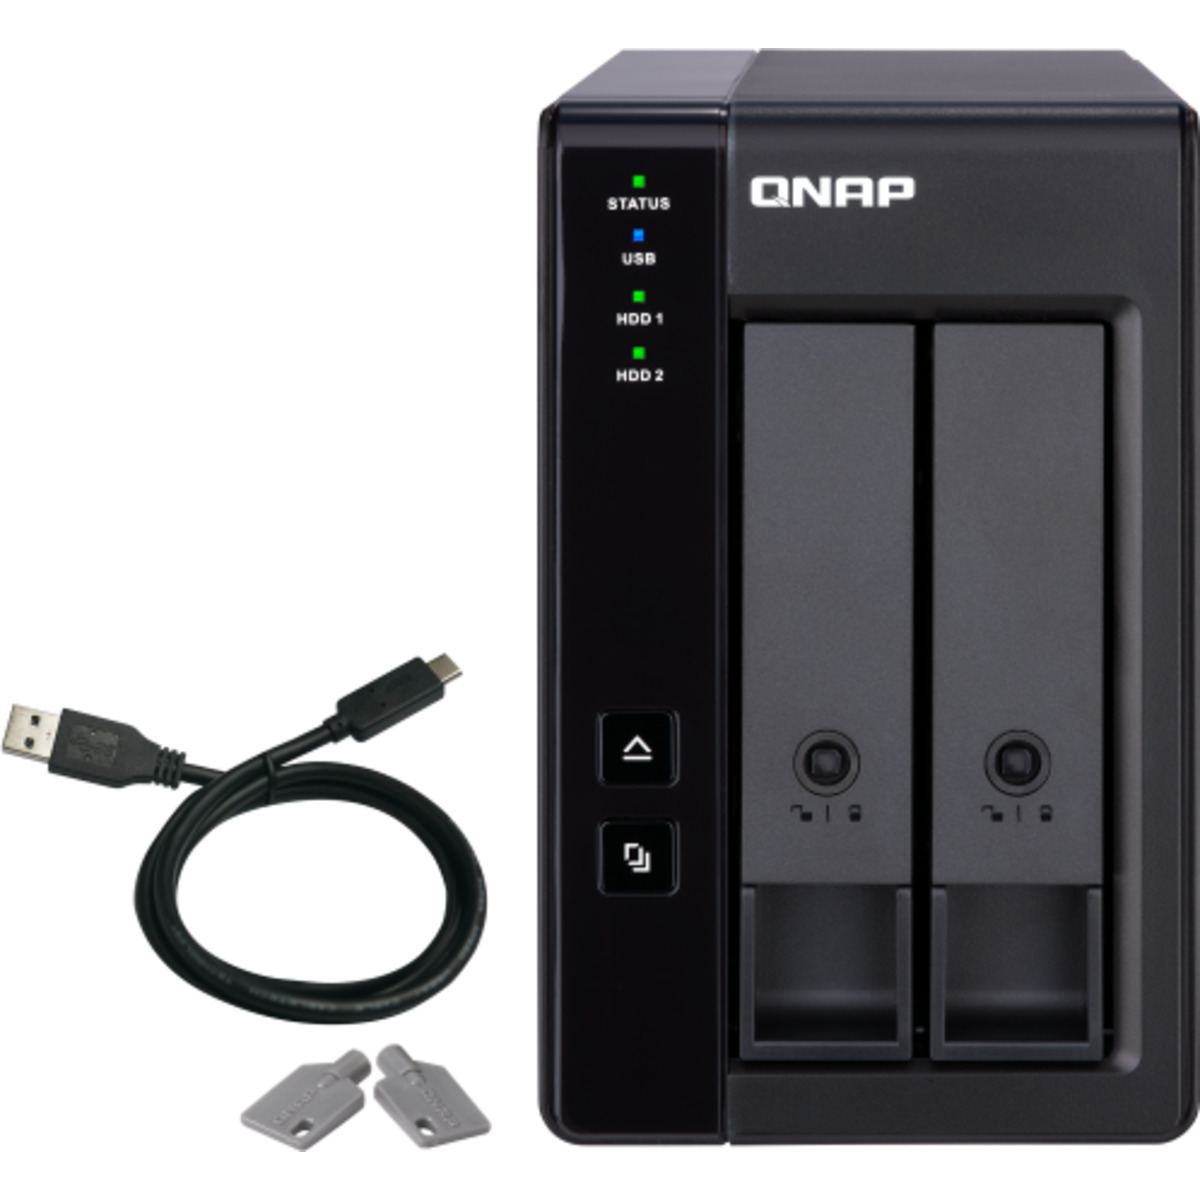 QNAP TR-002 External Expansion Drive 8tb 2-Bay Desktop Multimedia / Power User / Business Expansion Enclosure 2x4tb Toshiba MN Series MN08ADA400E 3.5 7200rpm SATA 6Gb/s HDD NAS Class Drives Installed - Burn-In Tested - ON SALE TR-002 External Expansion Drive